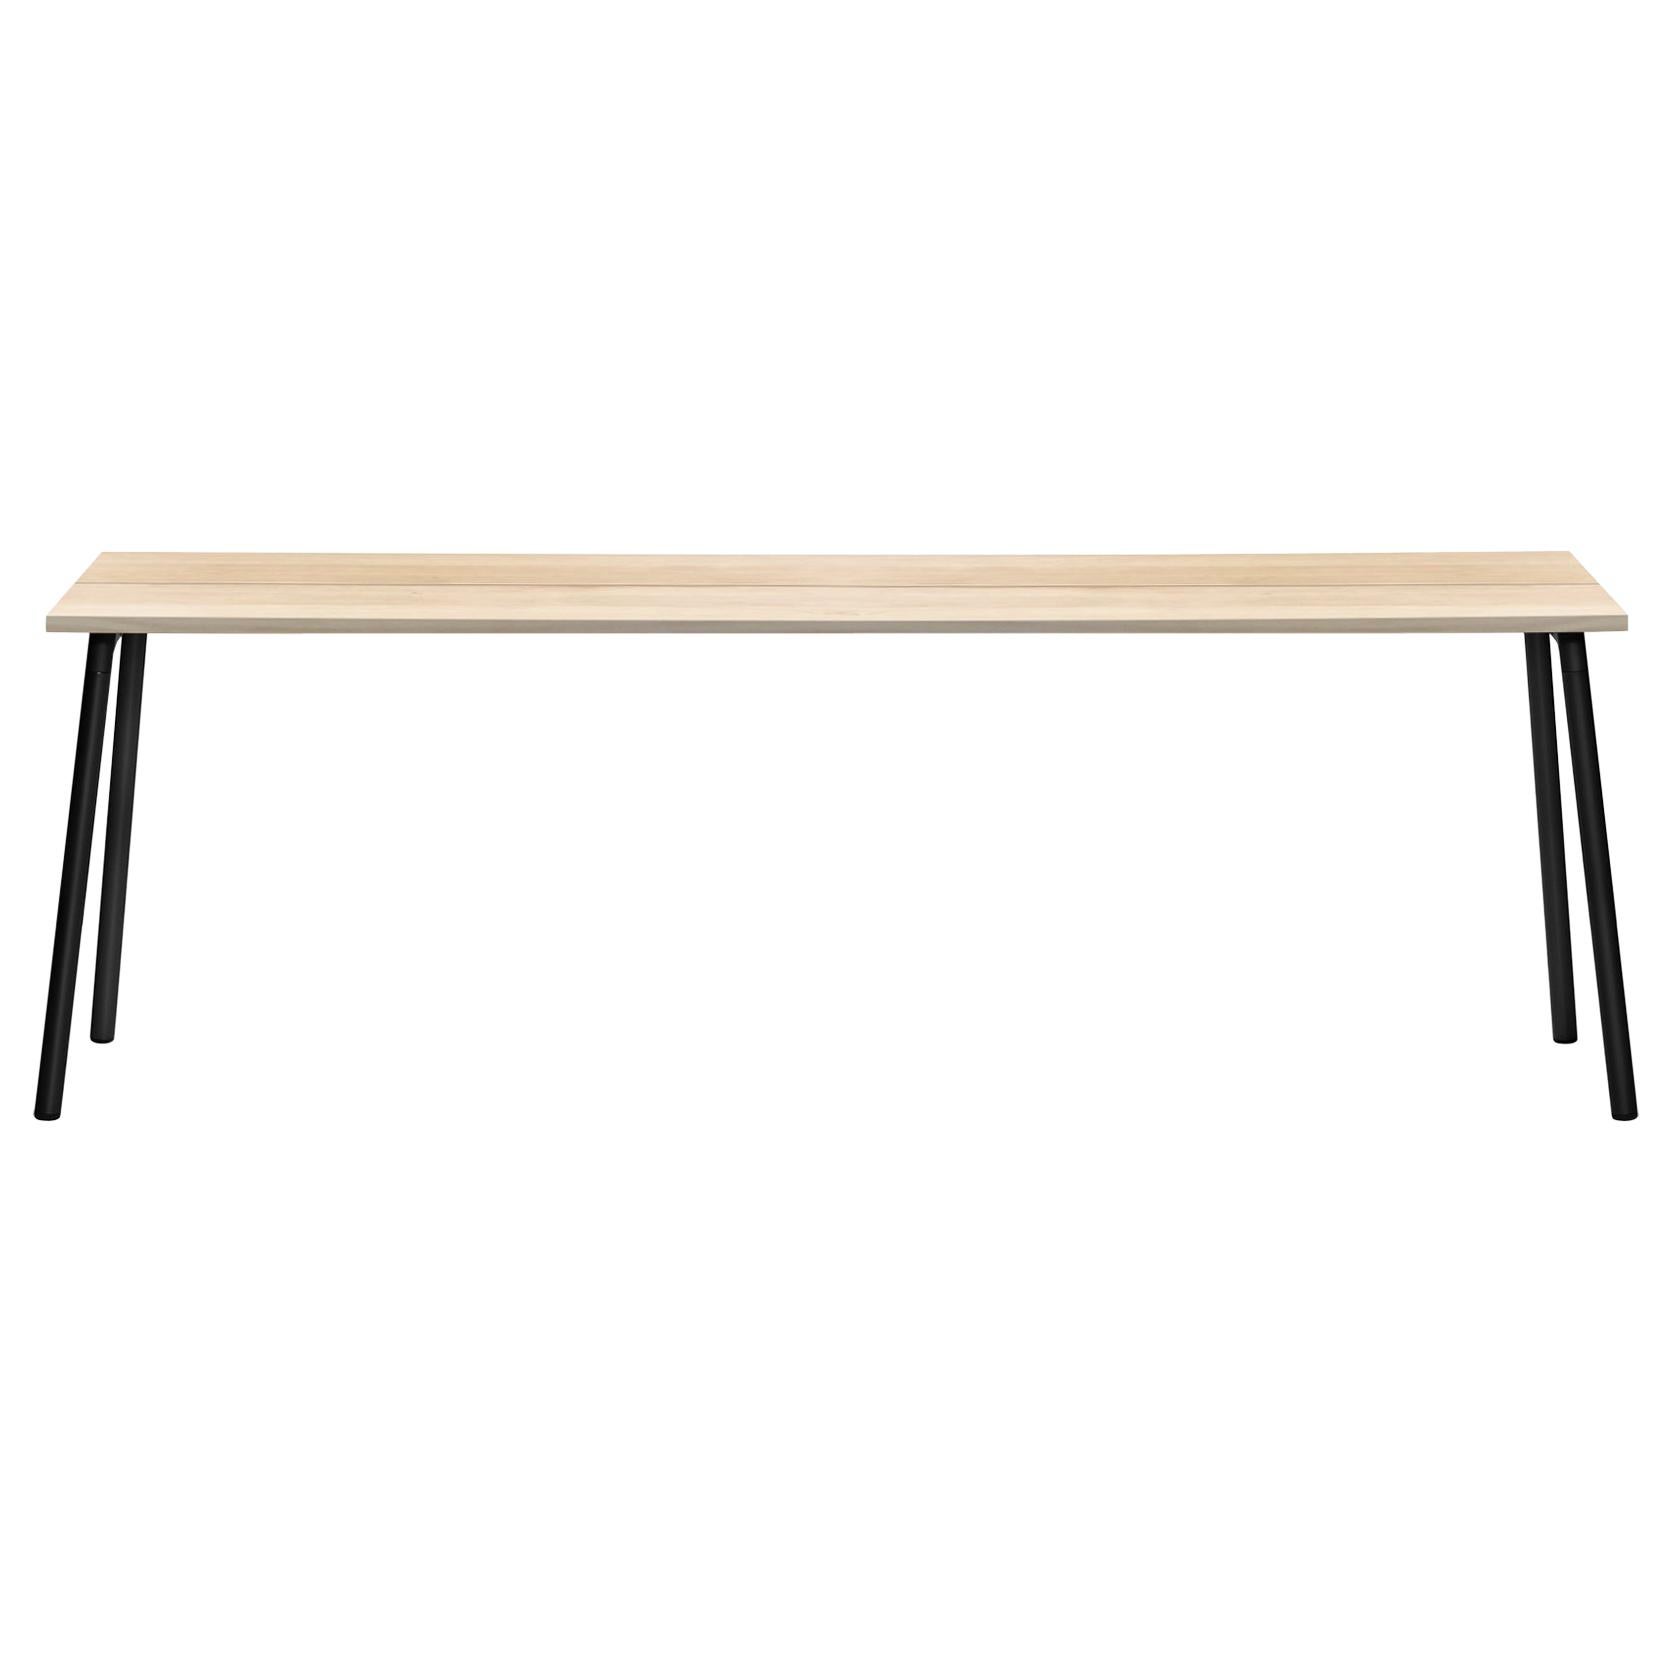 Emeco Run 86" Side Table with Black Frame & Wood Top by Sam Hecht and Kim Colin